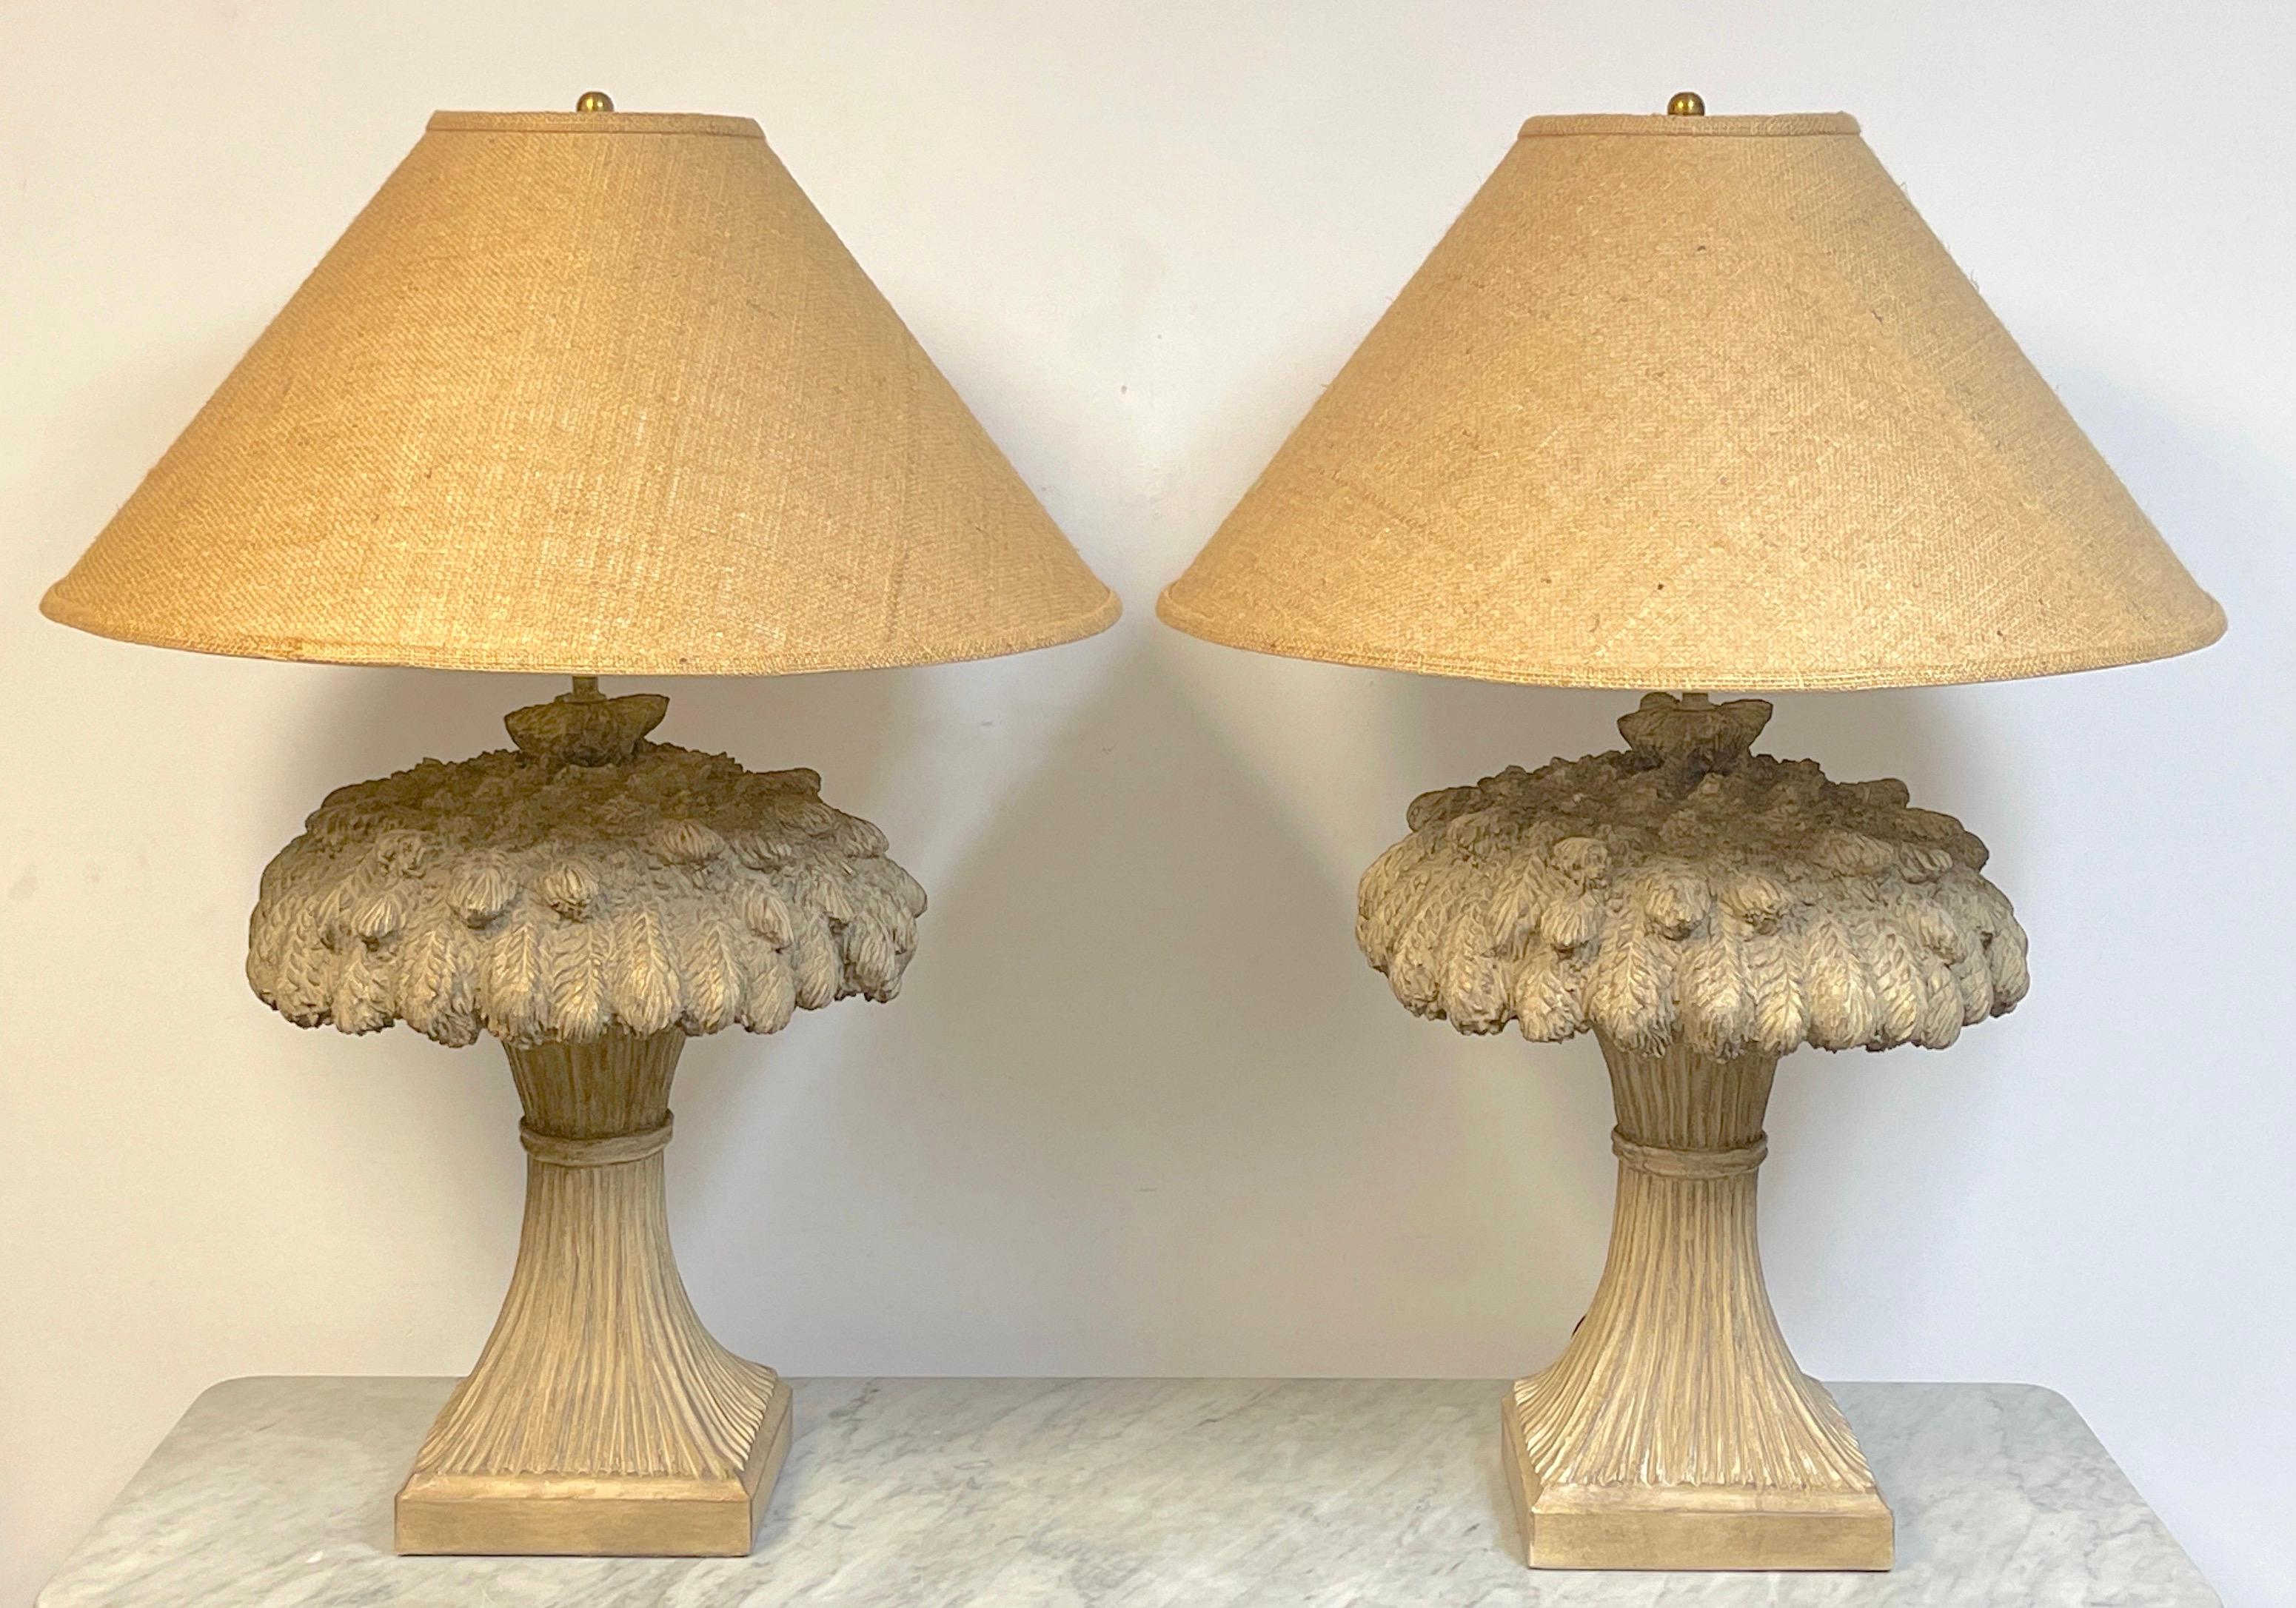 Pair of Modern Sculpted Terracotta Sheaf of Wheat Lamps, Austin Productions 
USA, circa 1990s

Each one a large sculptural form of a bundled sheaf of wheat. Stamped 